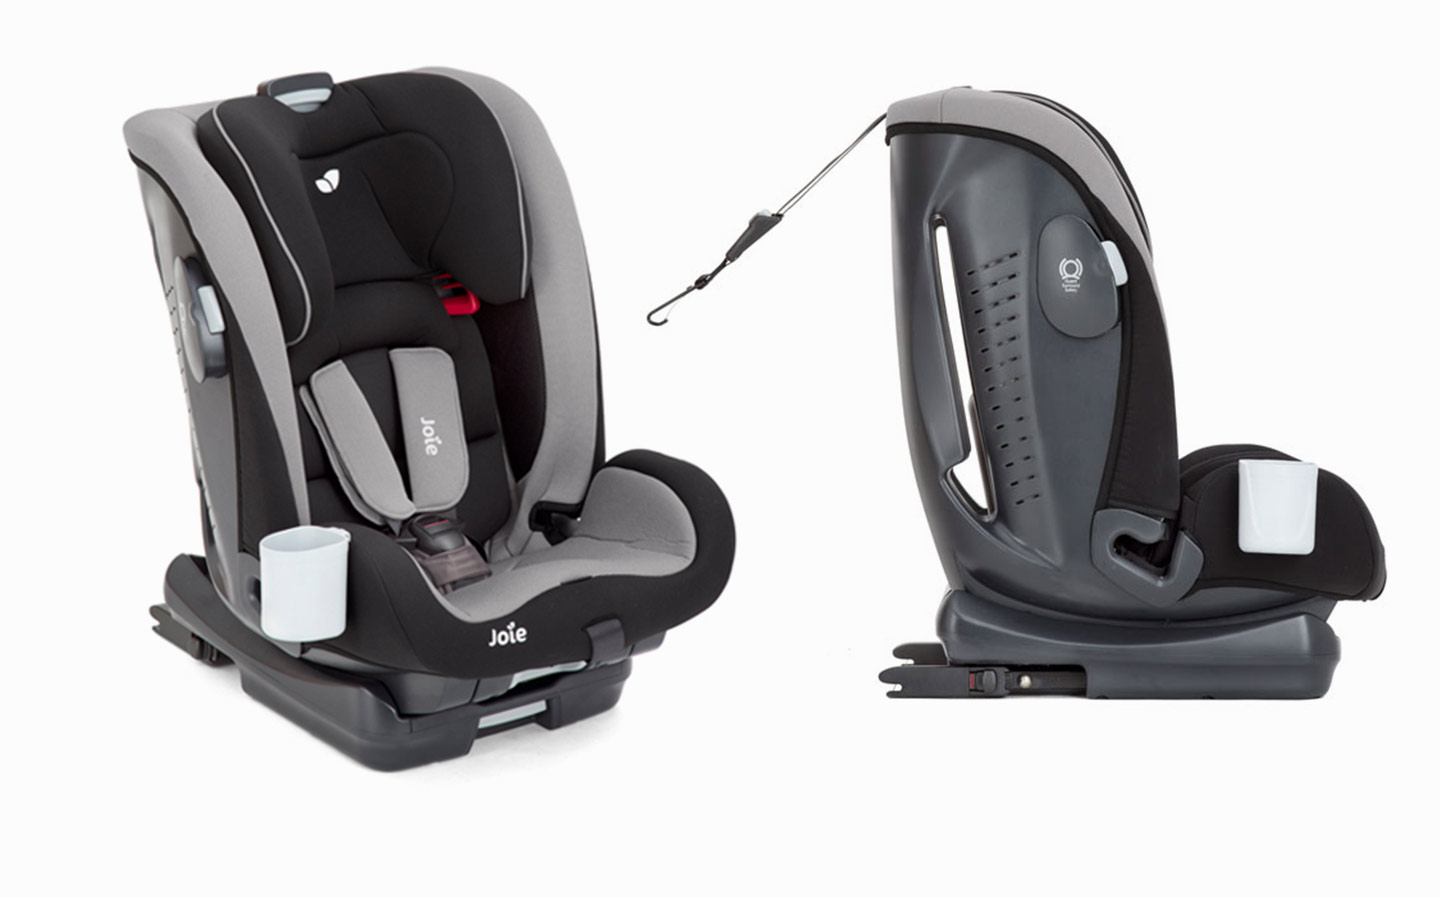 Joie bold child car seat review